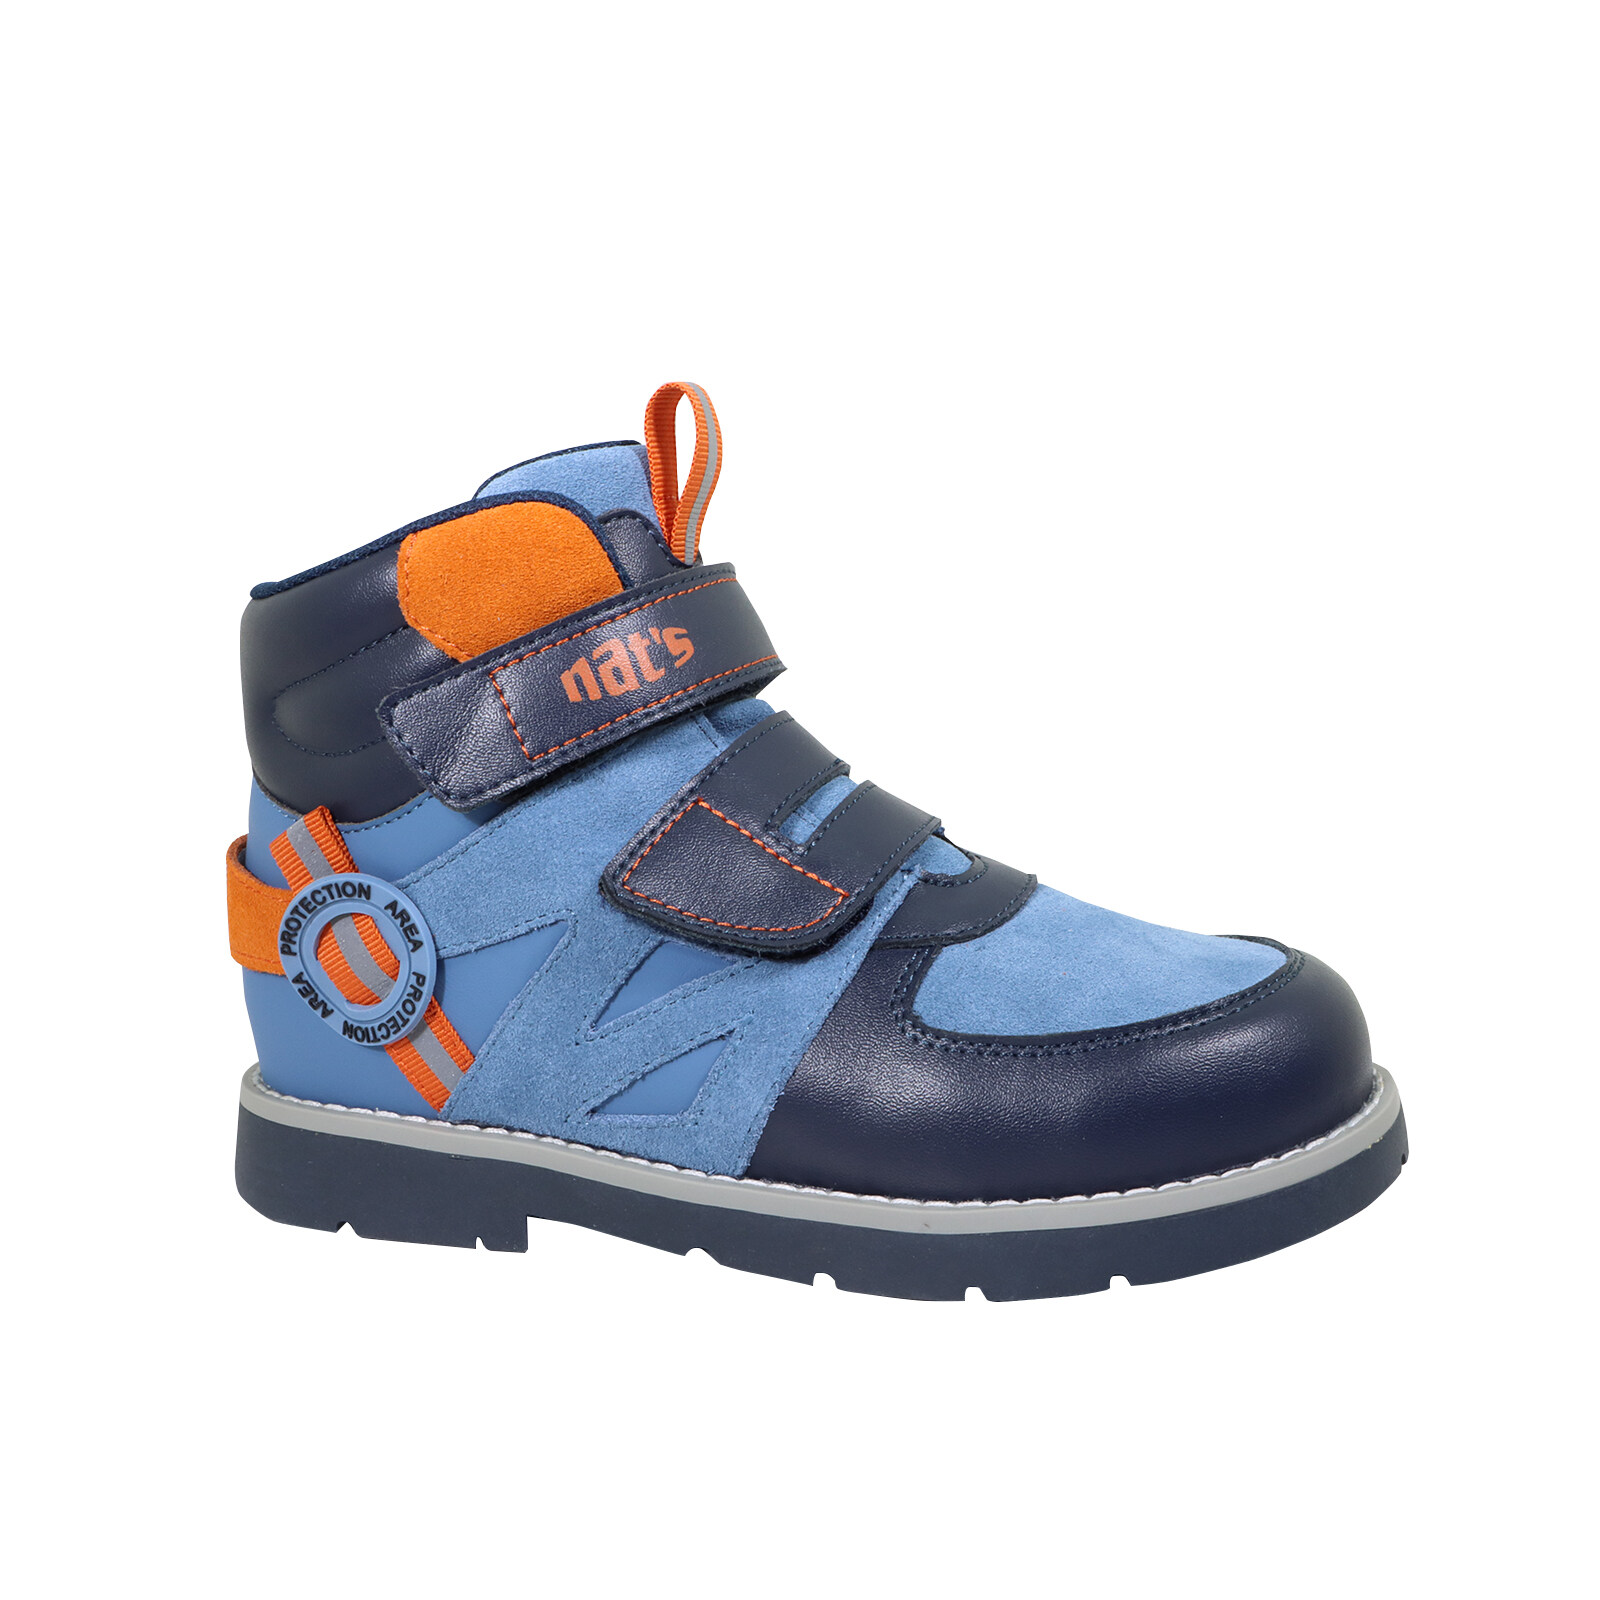 Customized comfort Orthopaedic Shoes for children